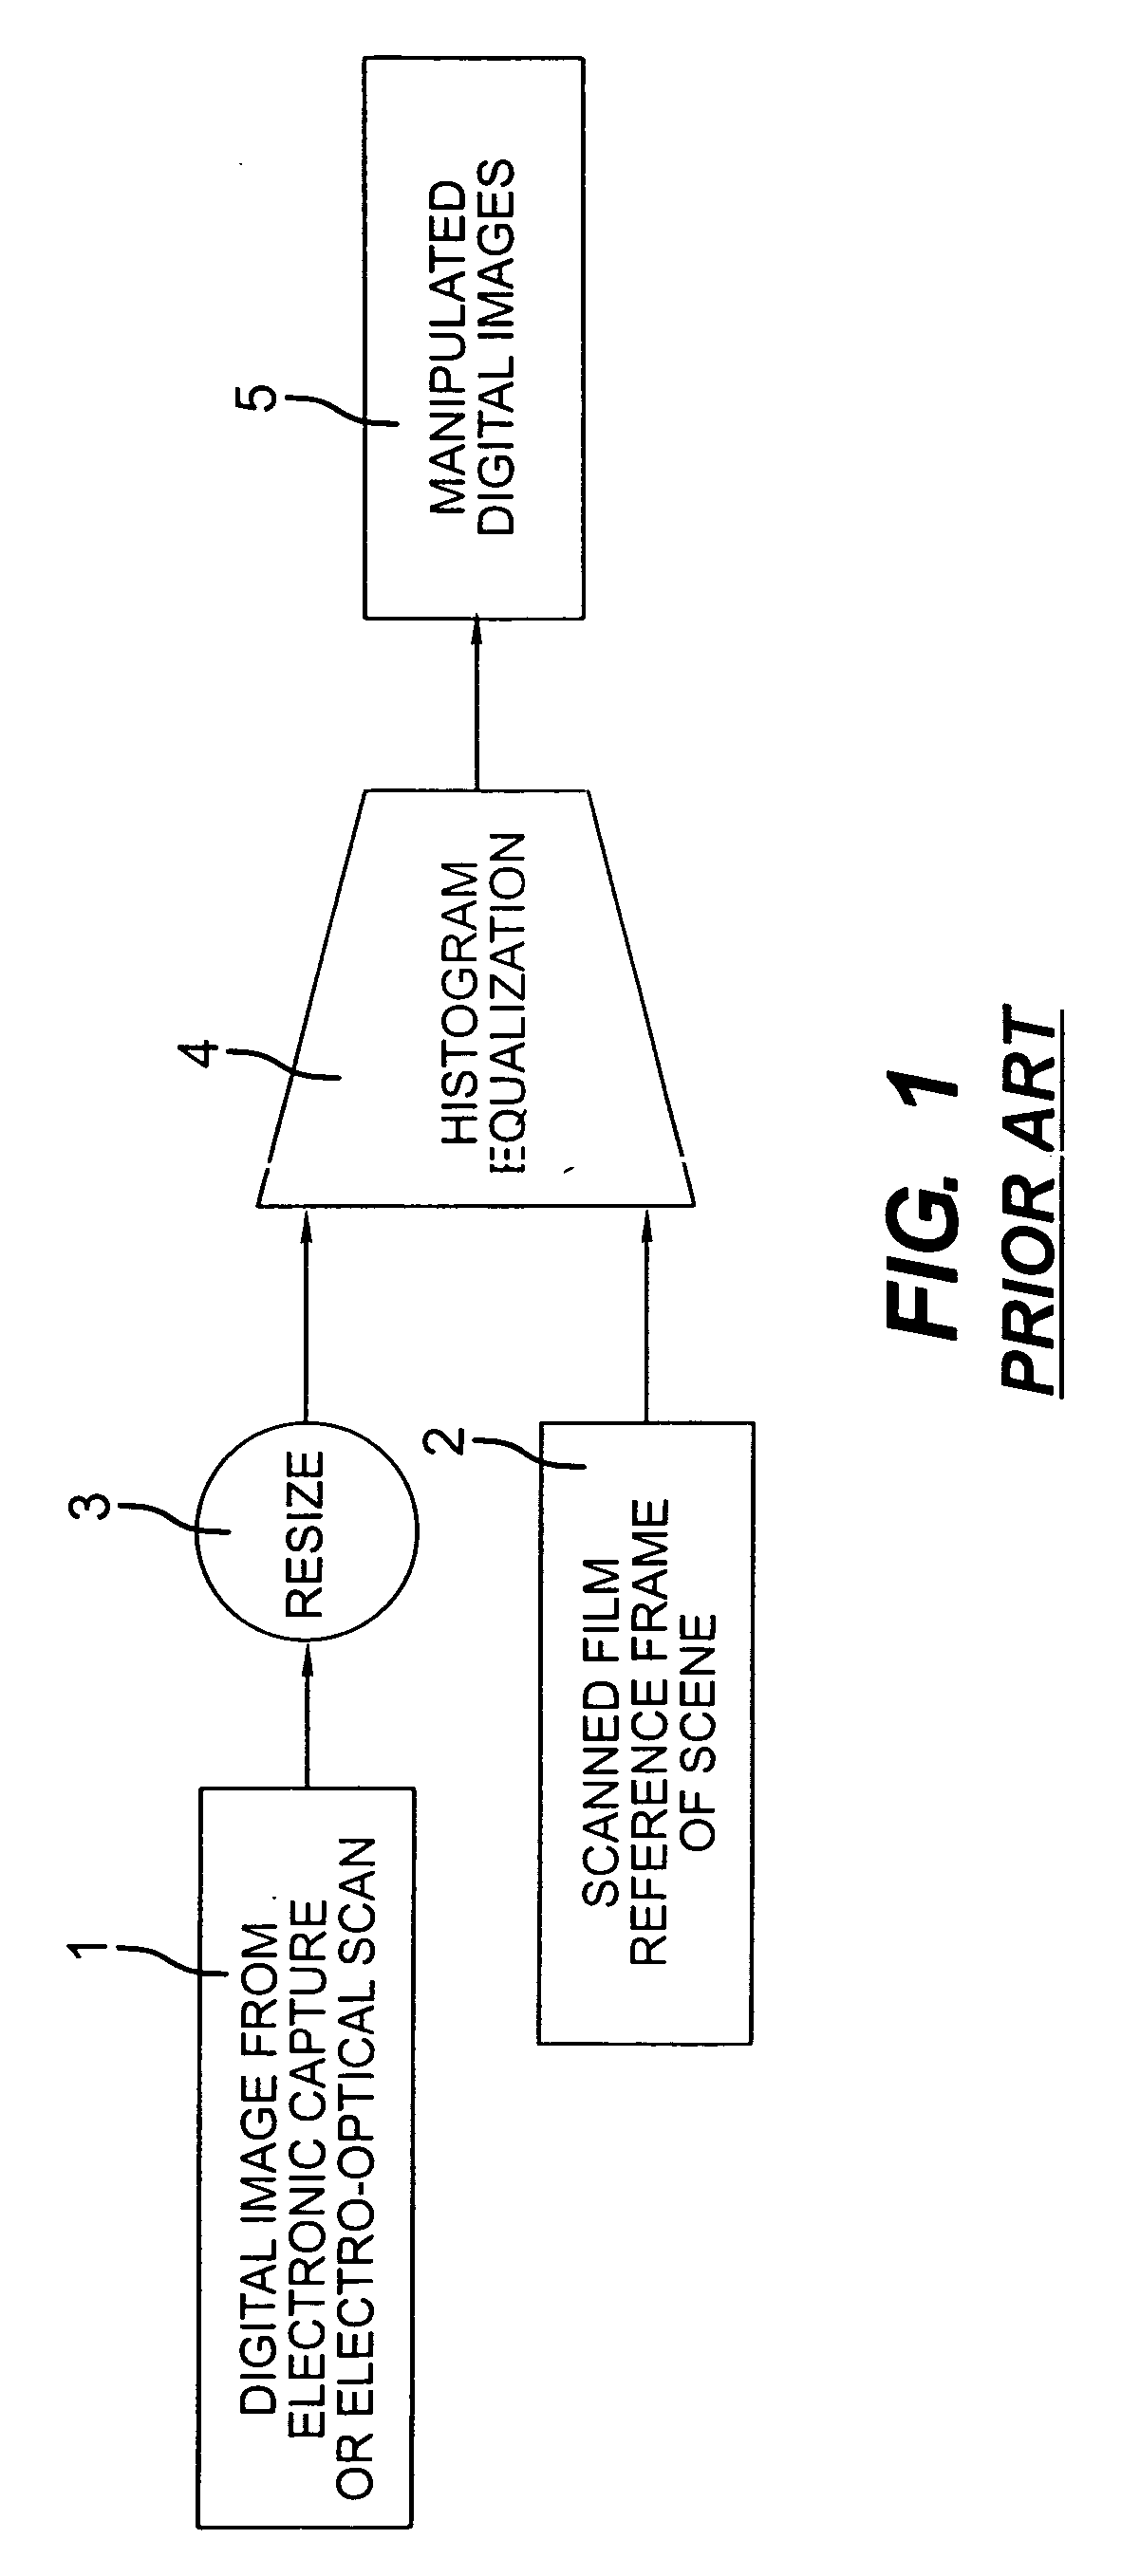 System and method for processing images to emulate film tonescale and color